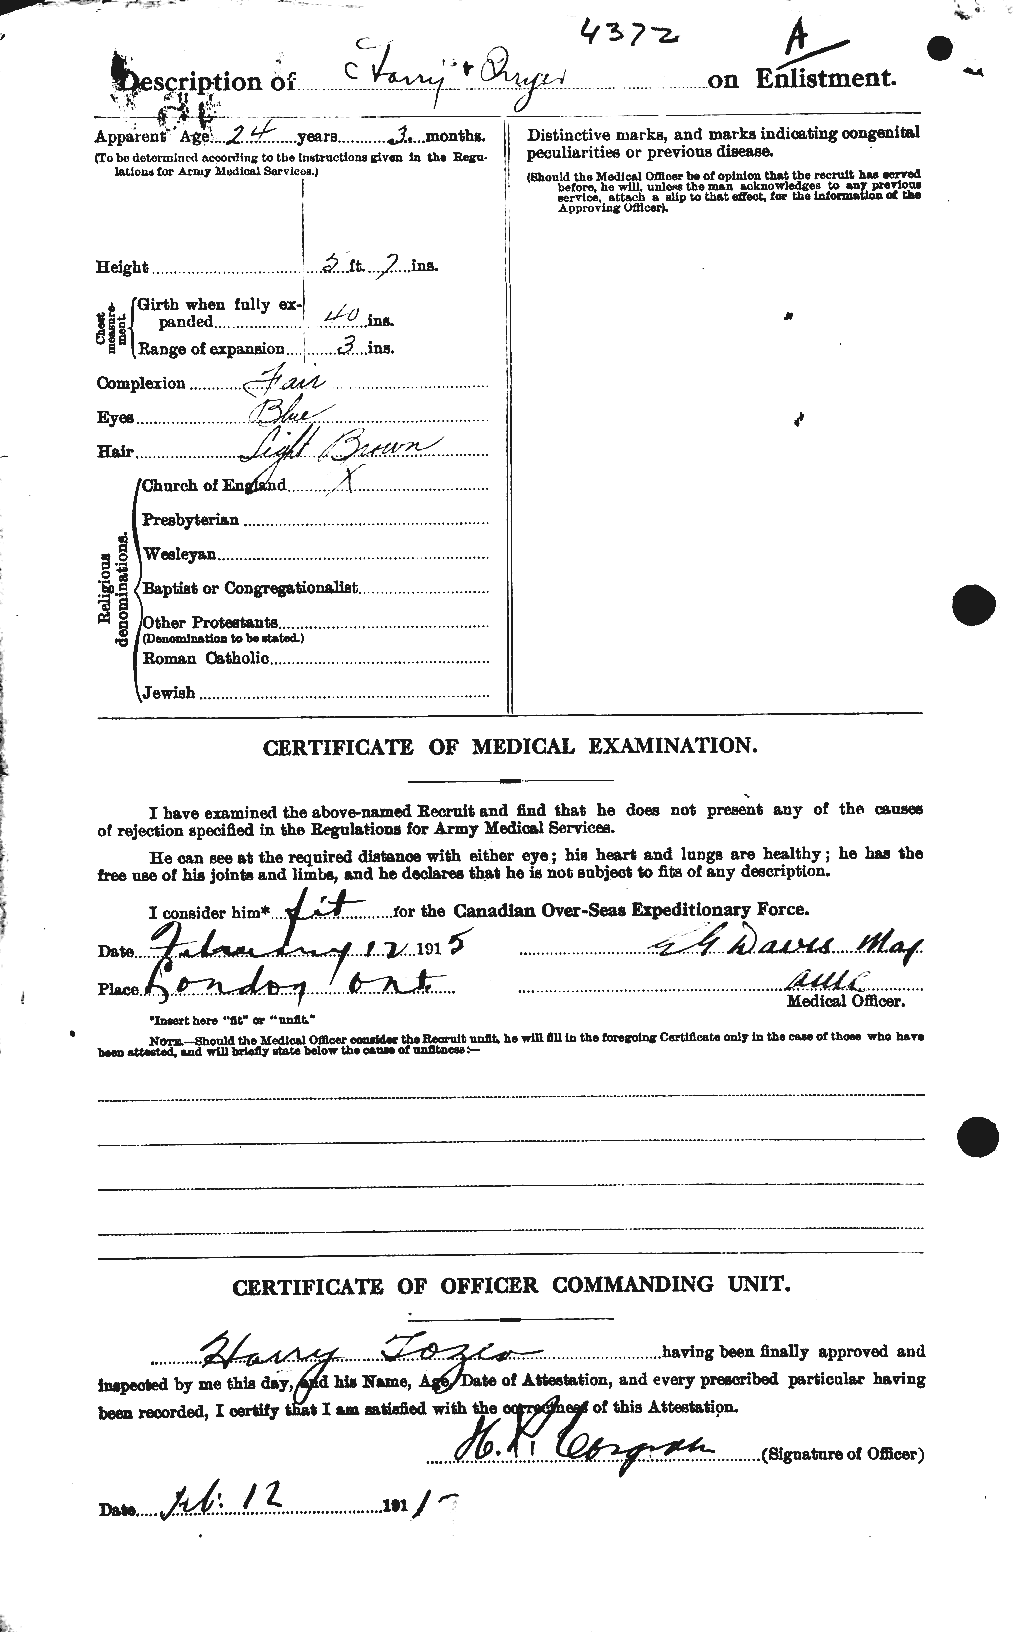 Personnel Records of the First World War - CEF 637061b